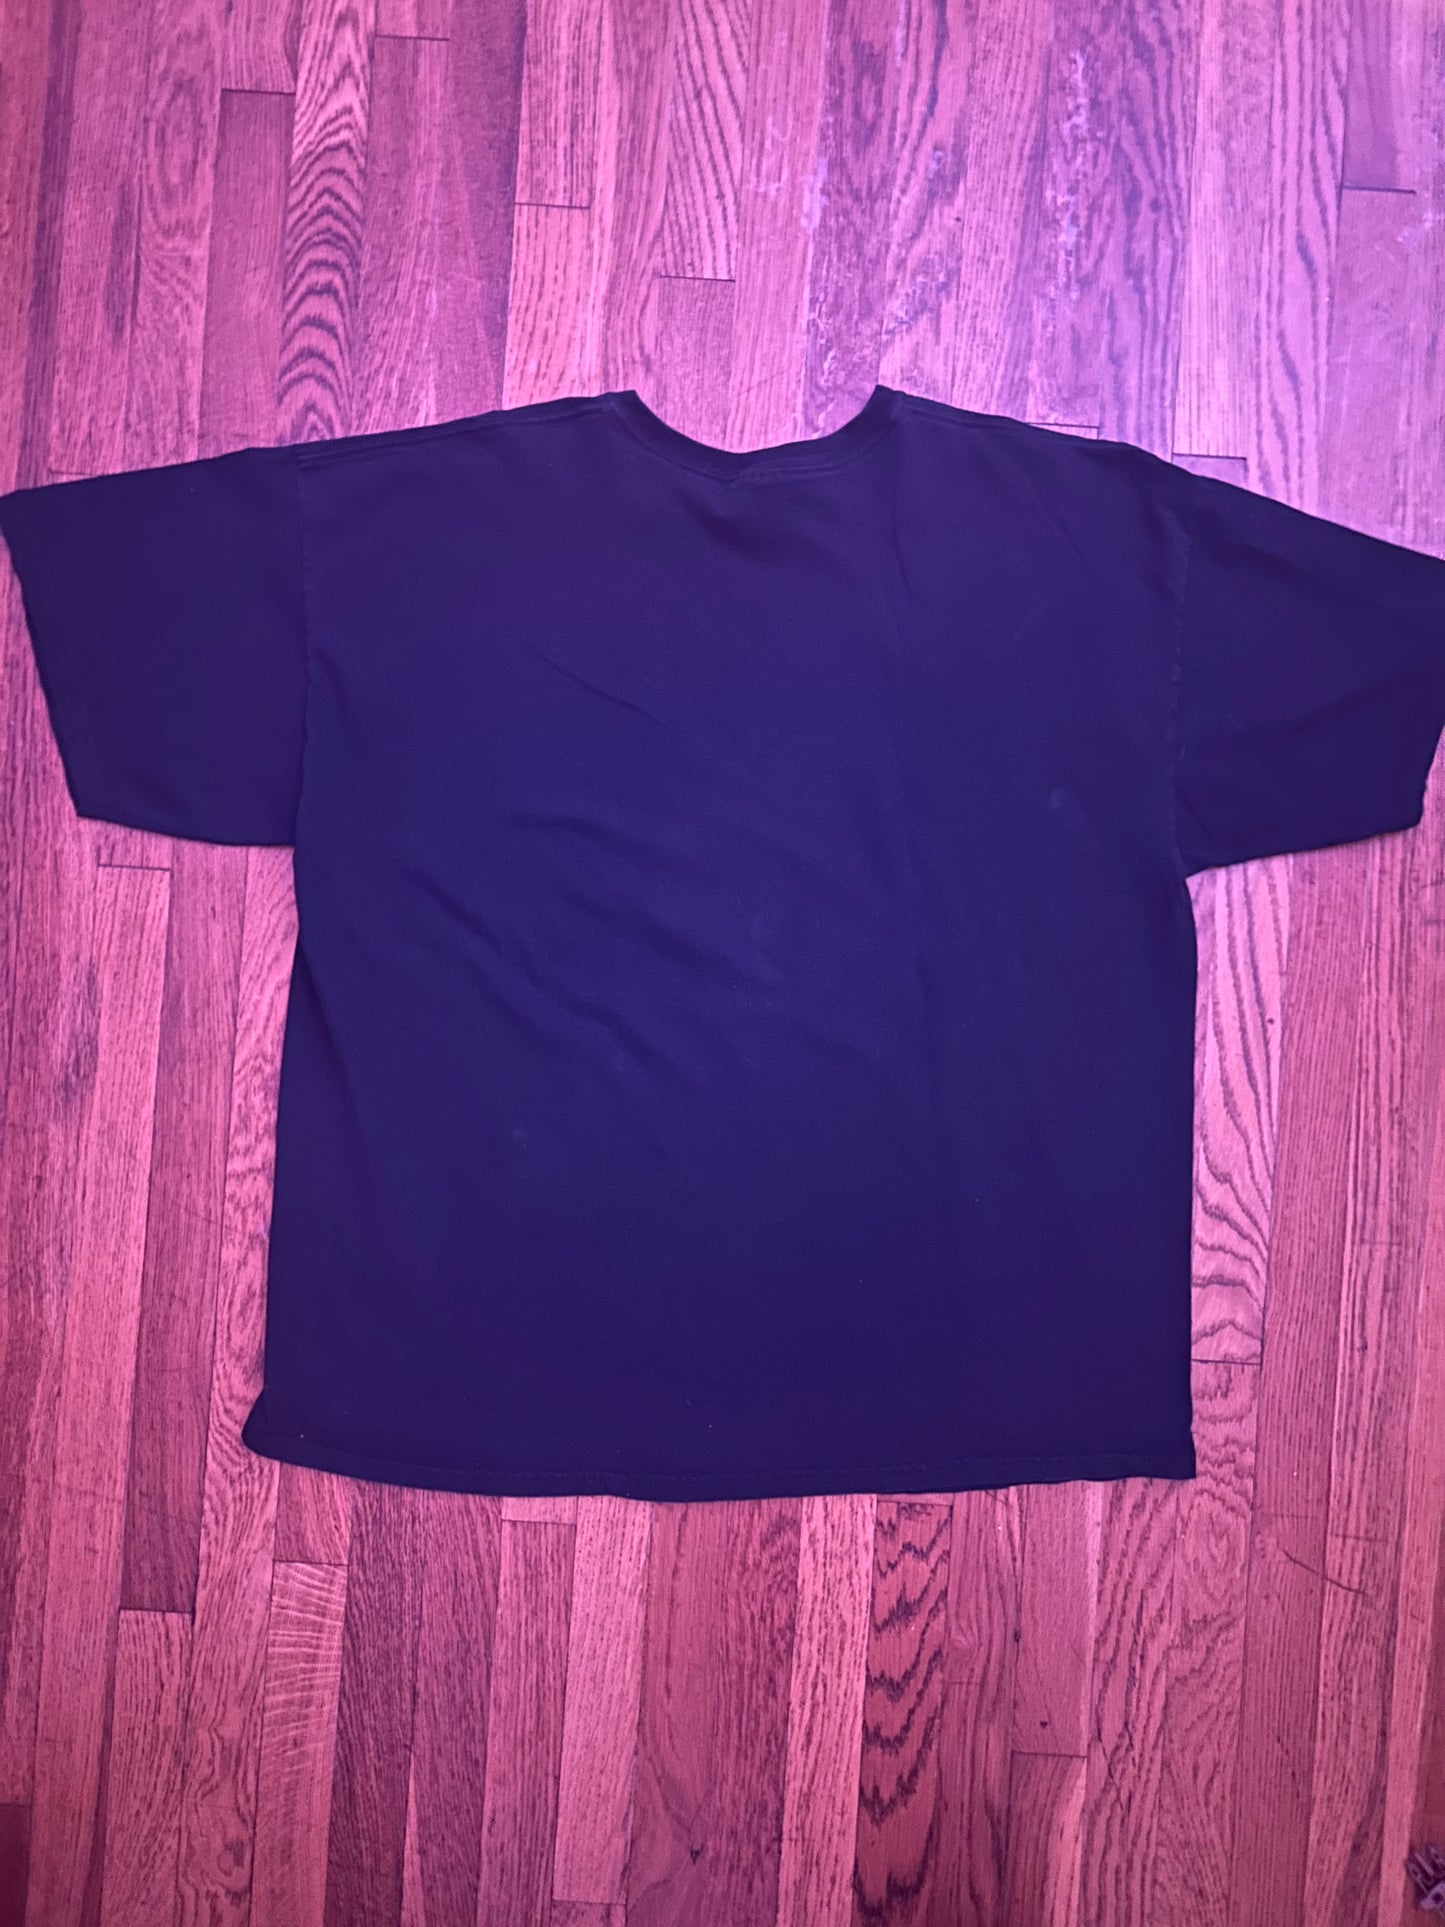 2000s Homeland Security Tee Size - XL